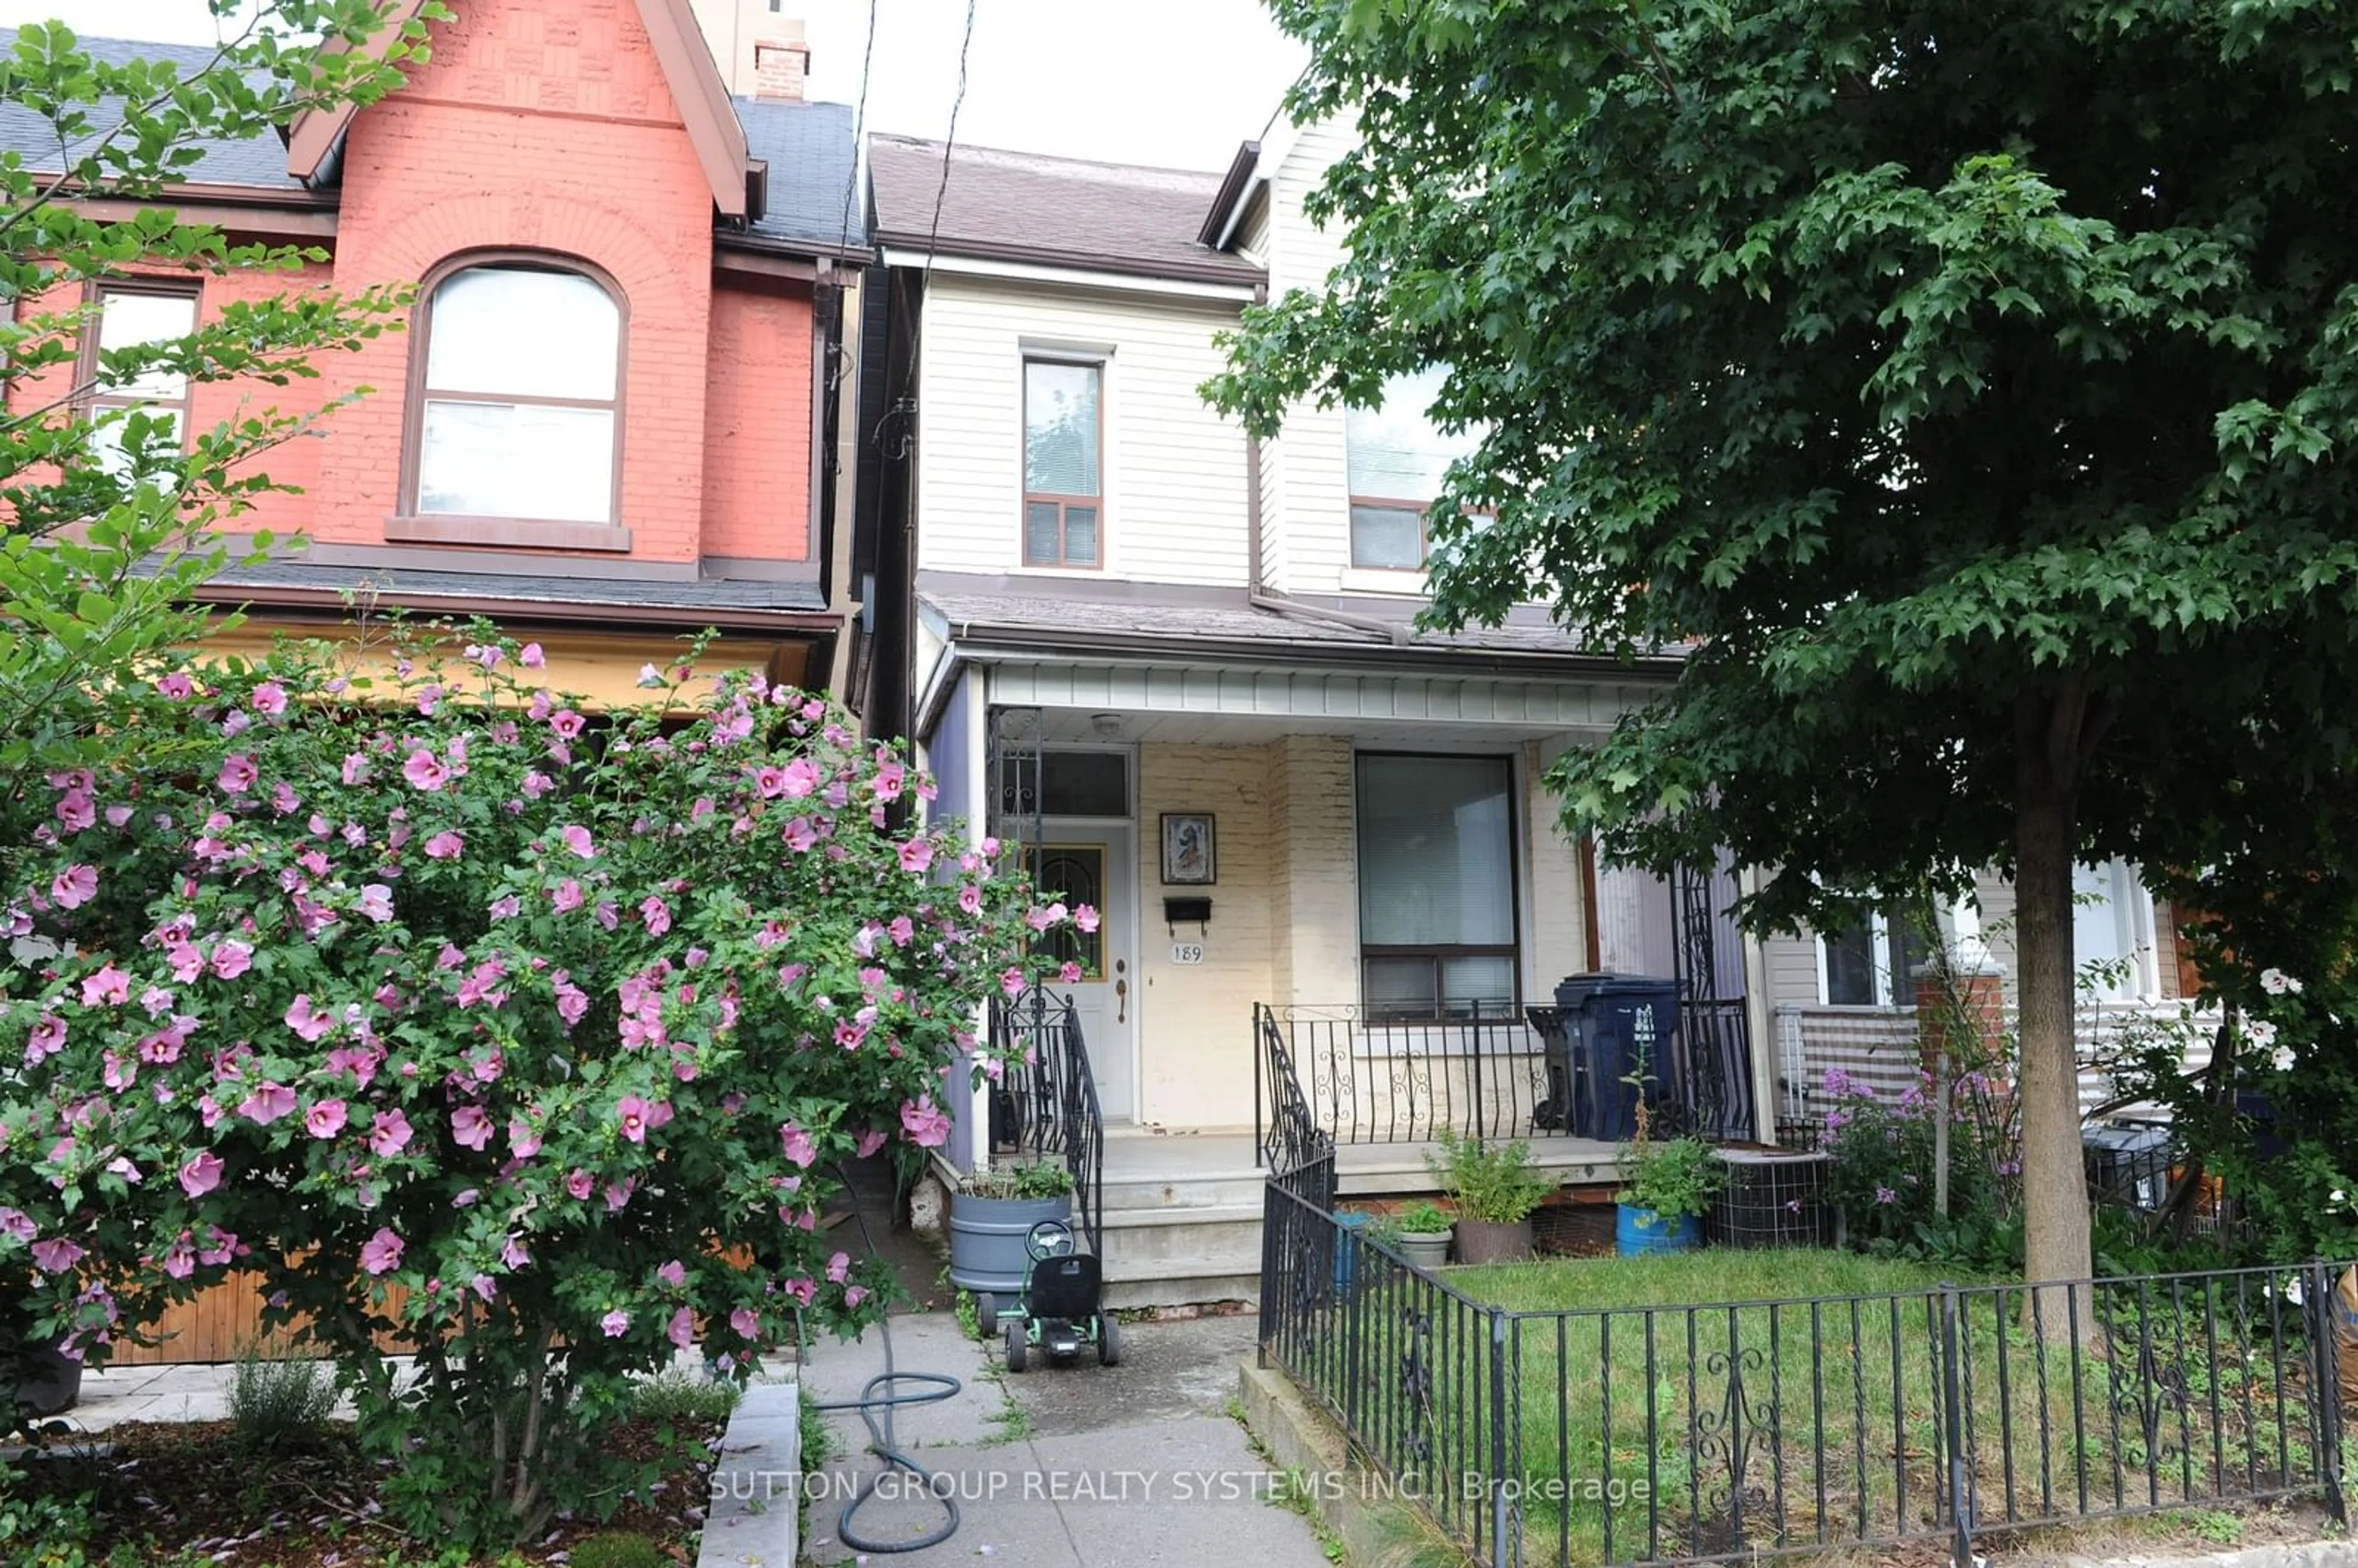 A pic from exterior of the house or condo for 189 Osler St, Toronto Ontario M6N 2Z2